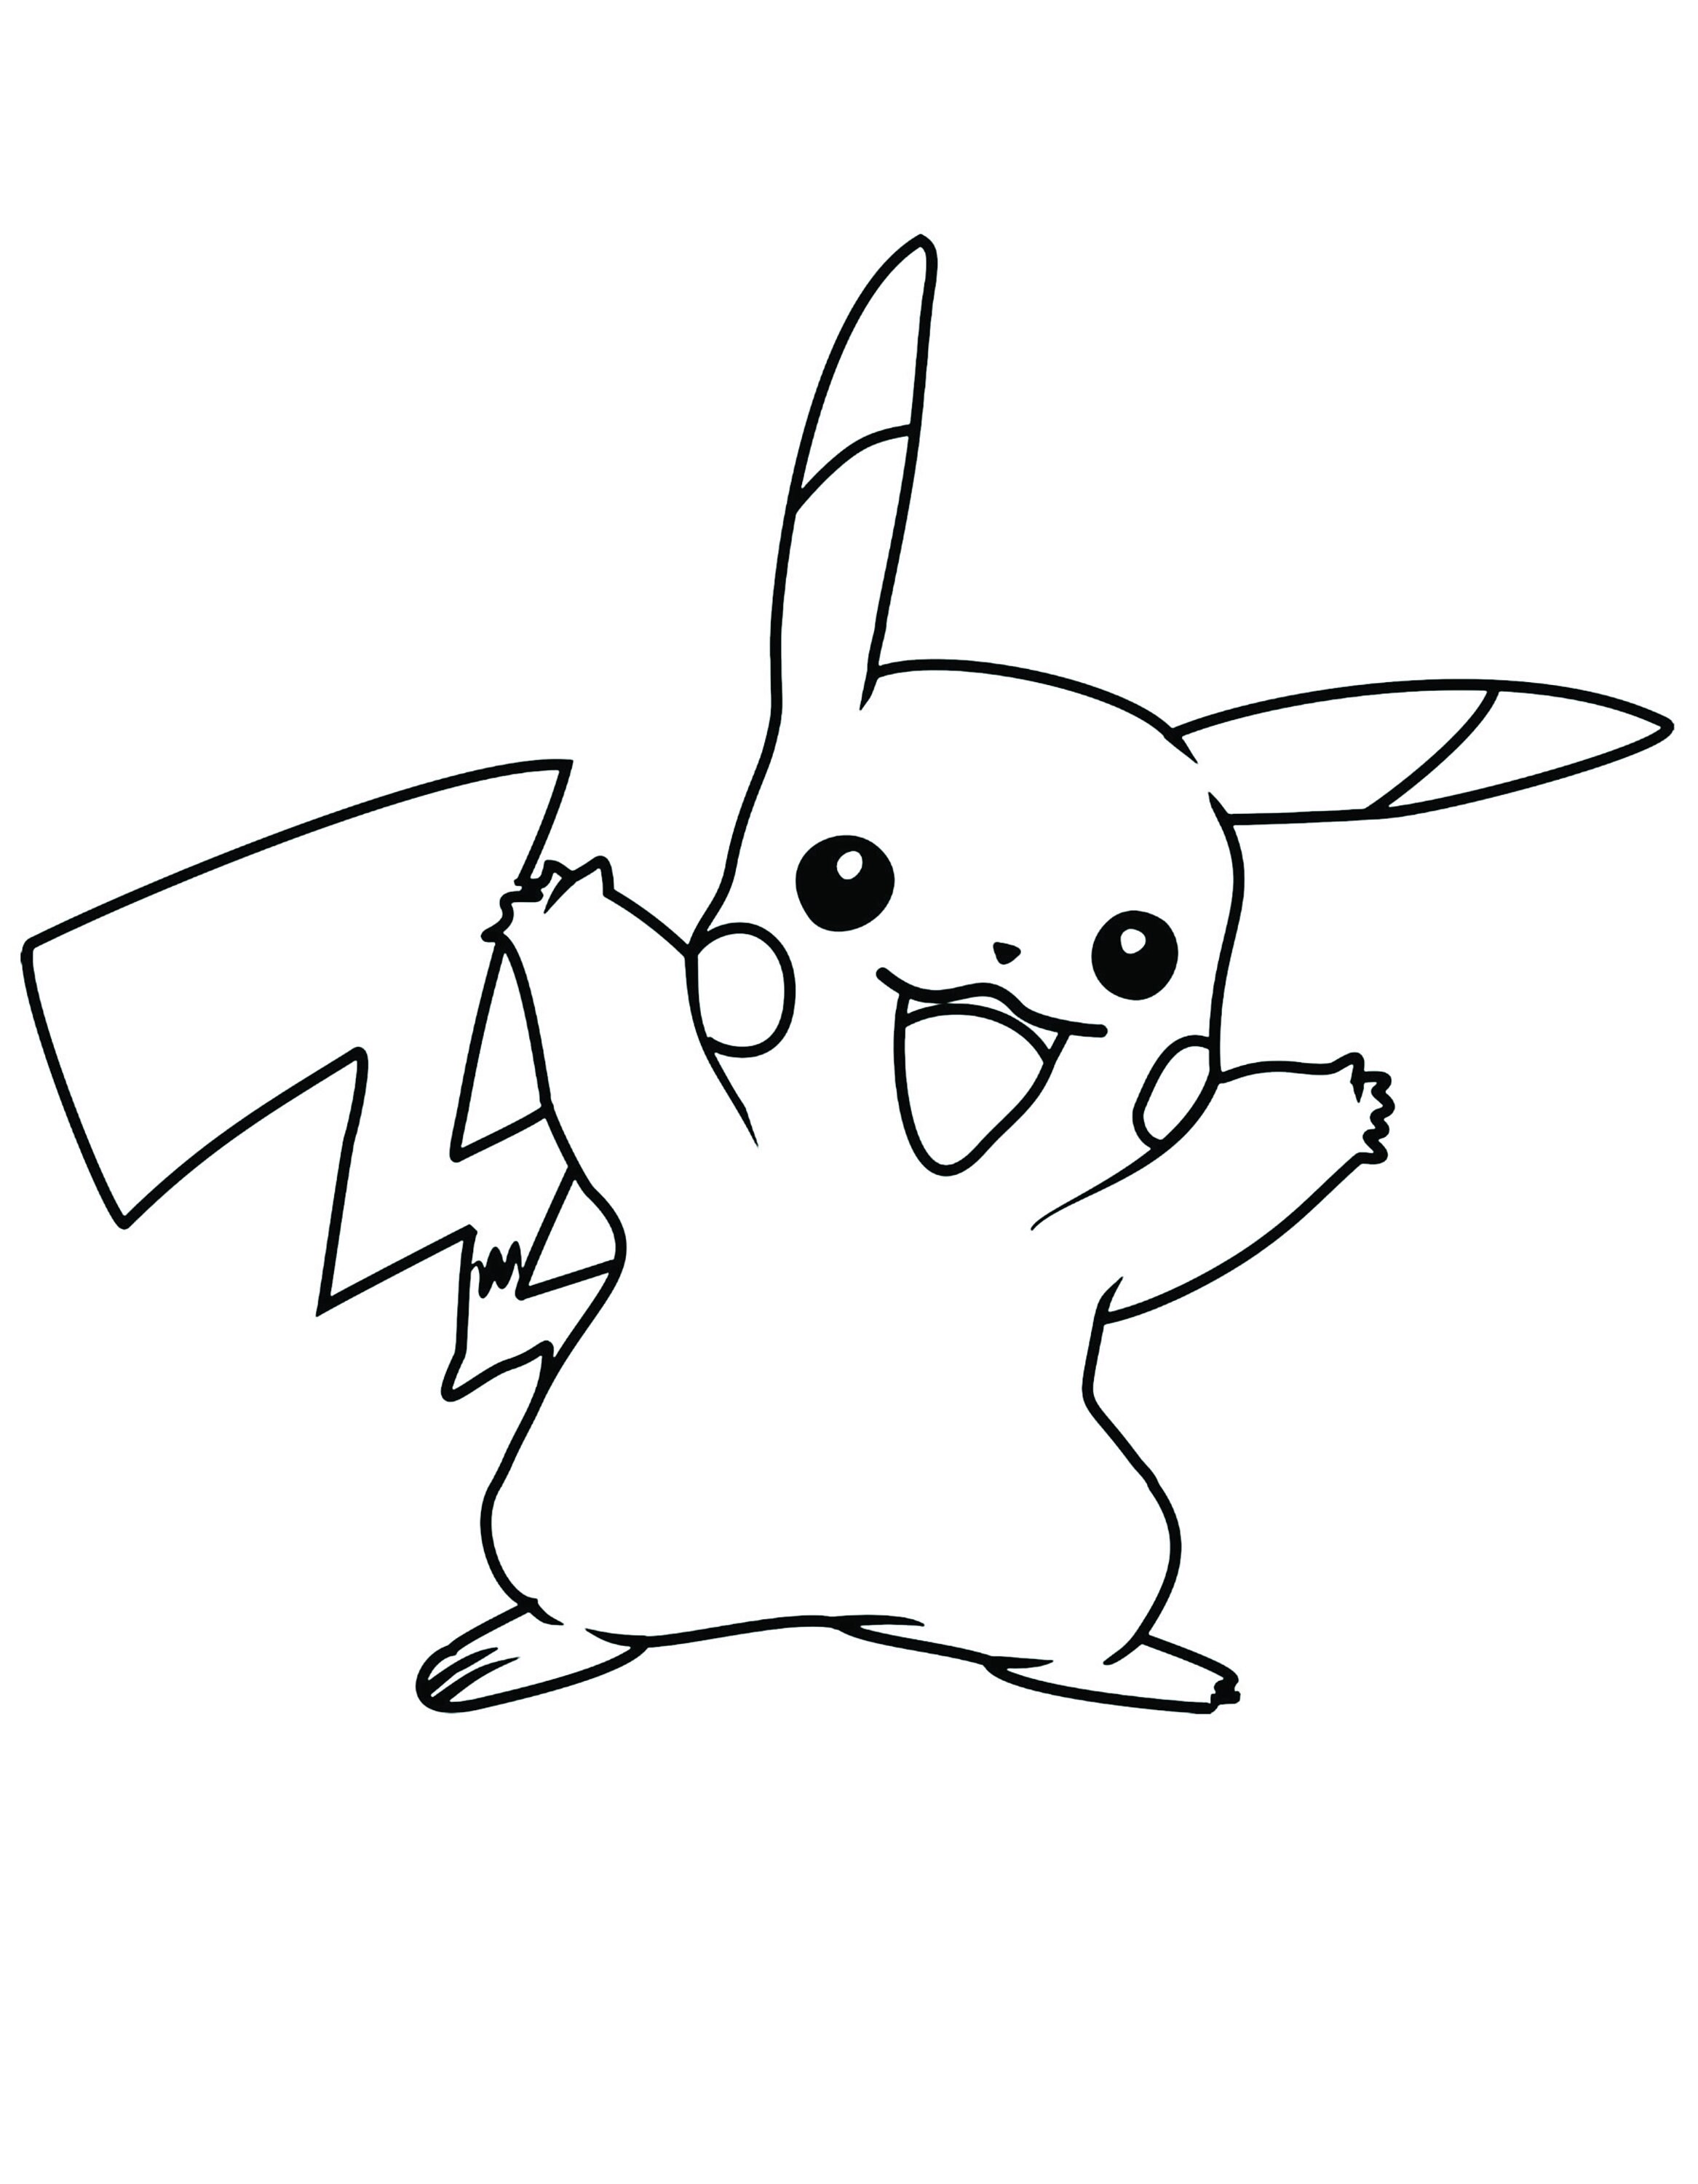 64 Pokemon Coloring Pages for Kids, Best Gifts for Girls, Best